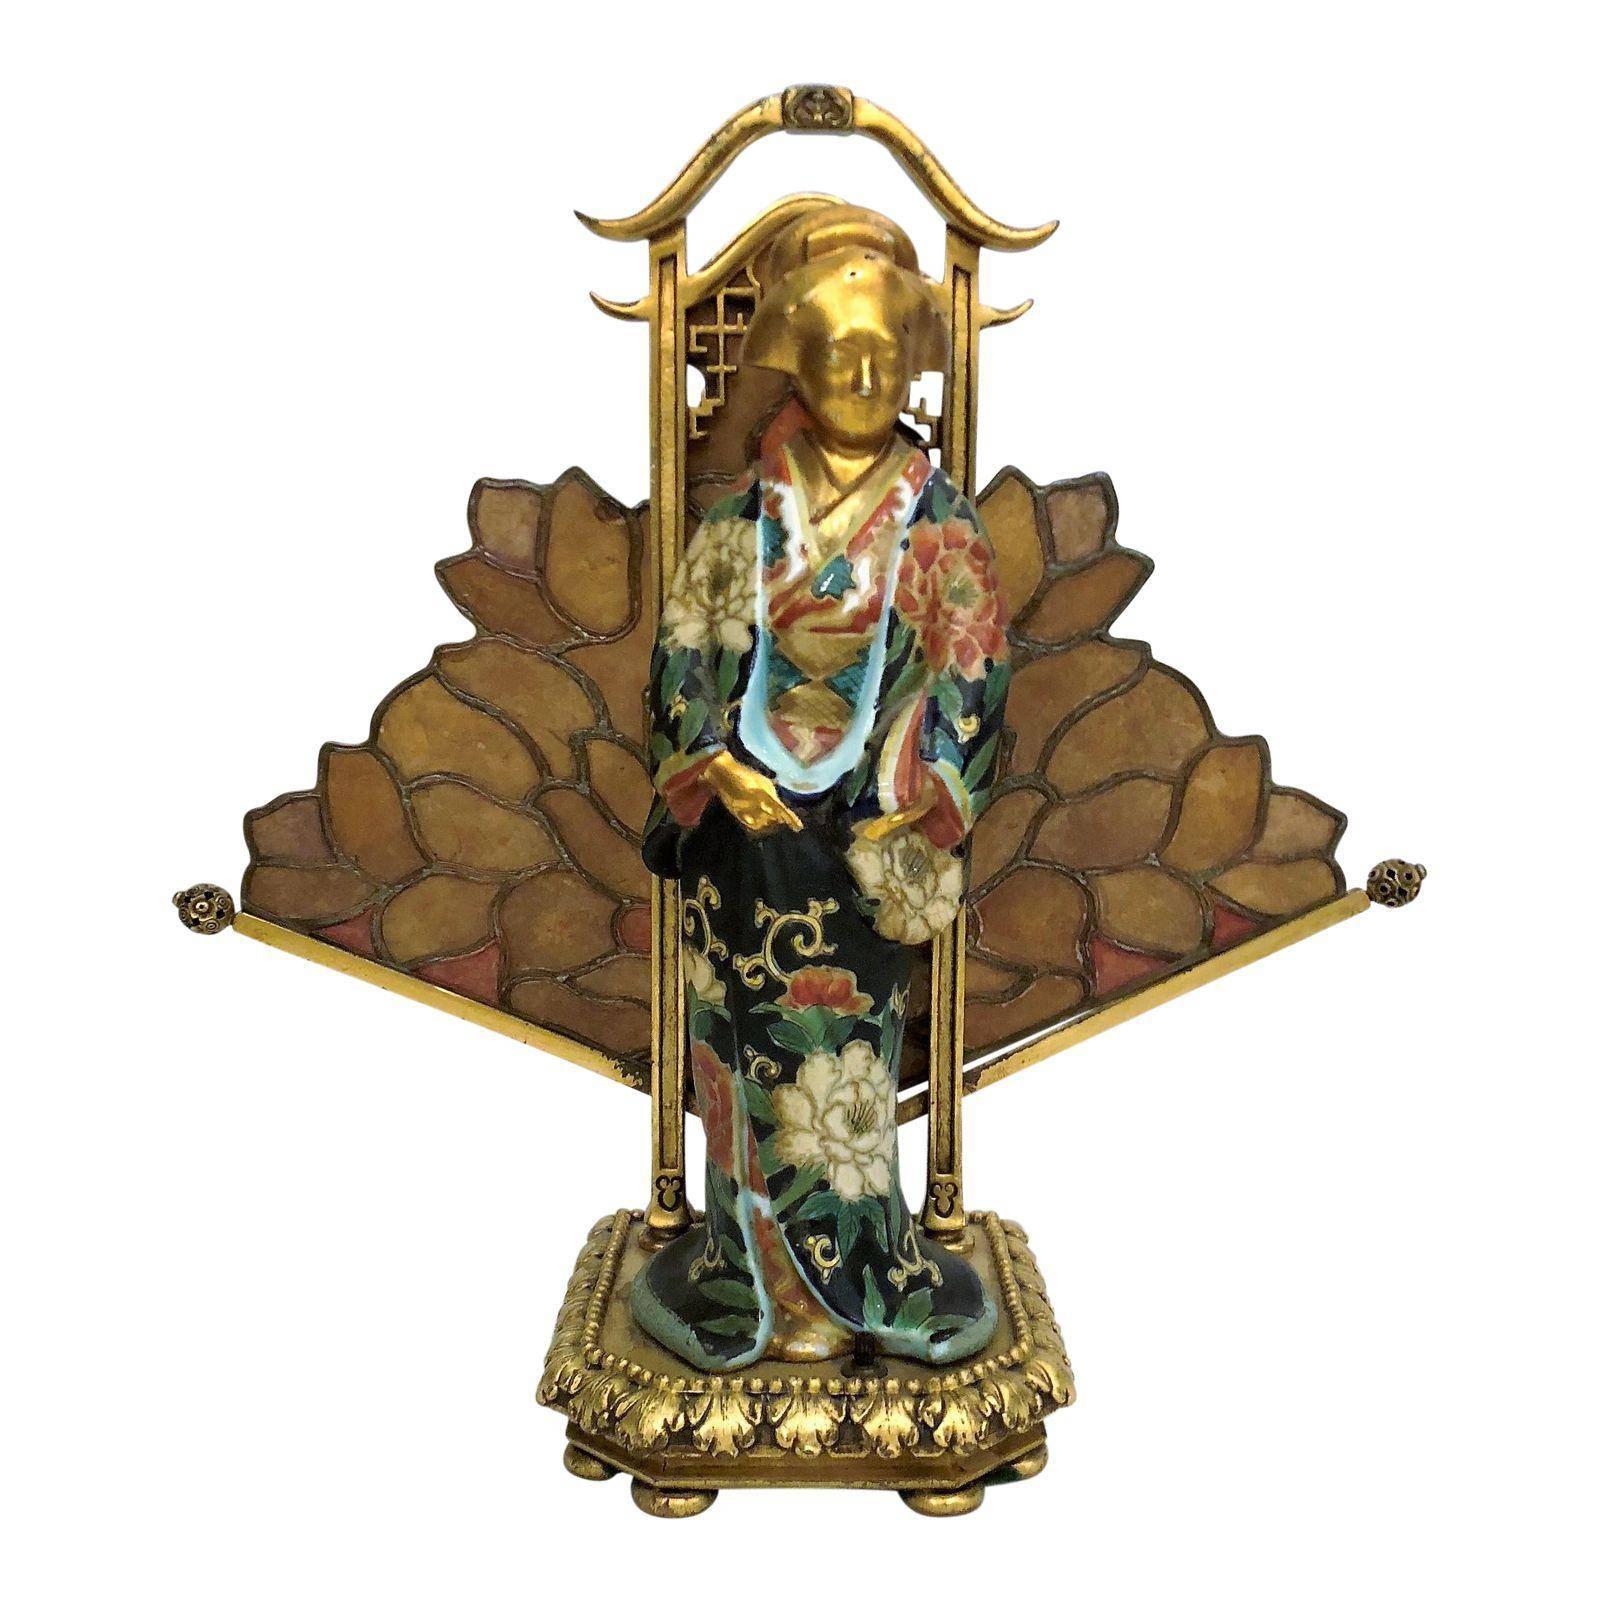 Antique French Art Nouveau Lamp, Kuan Xen Figure with Stained Glass, circa 1930 For Sale